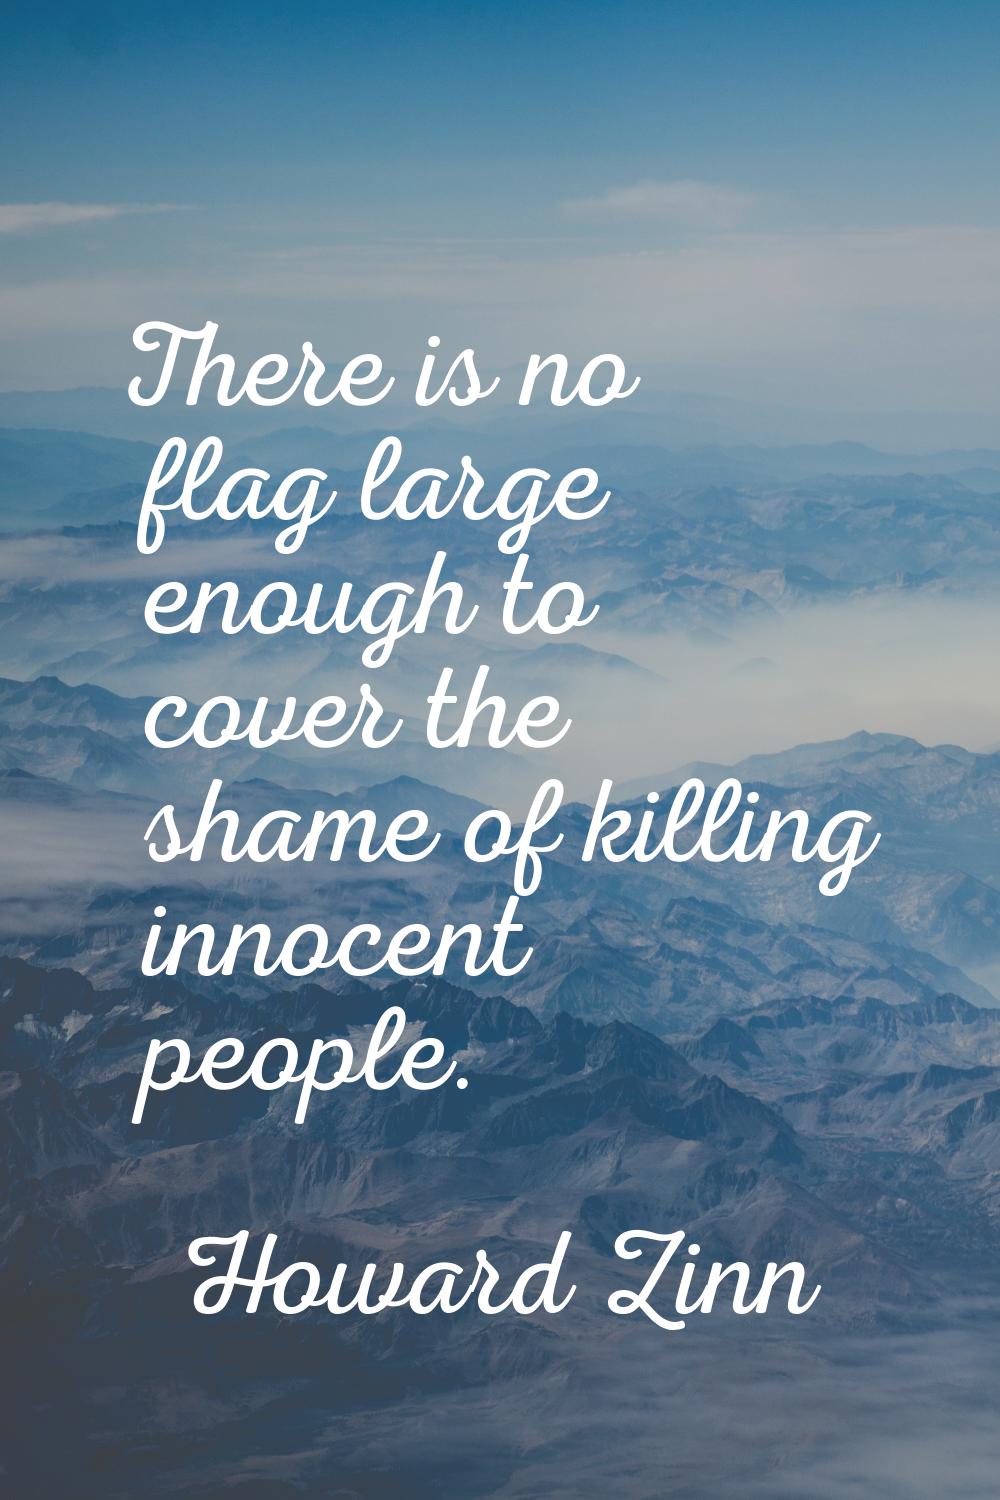 There is no flag large enough to cover the shame of killing innocent people.